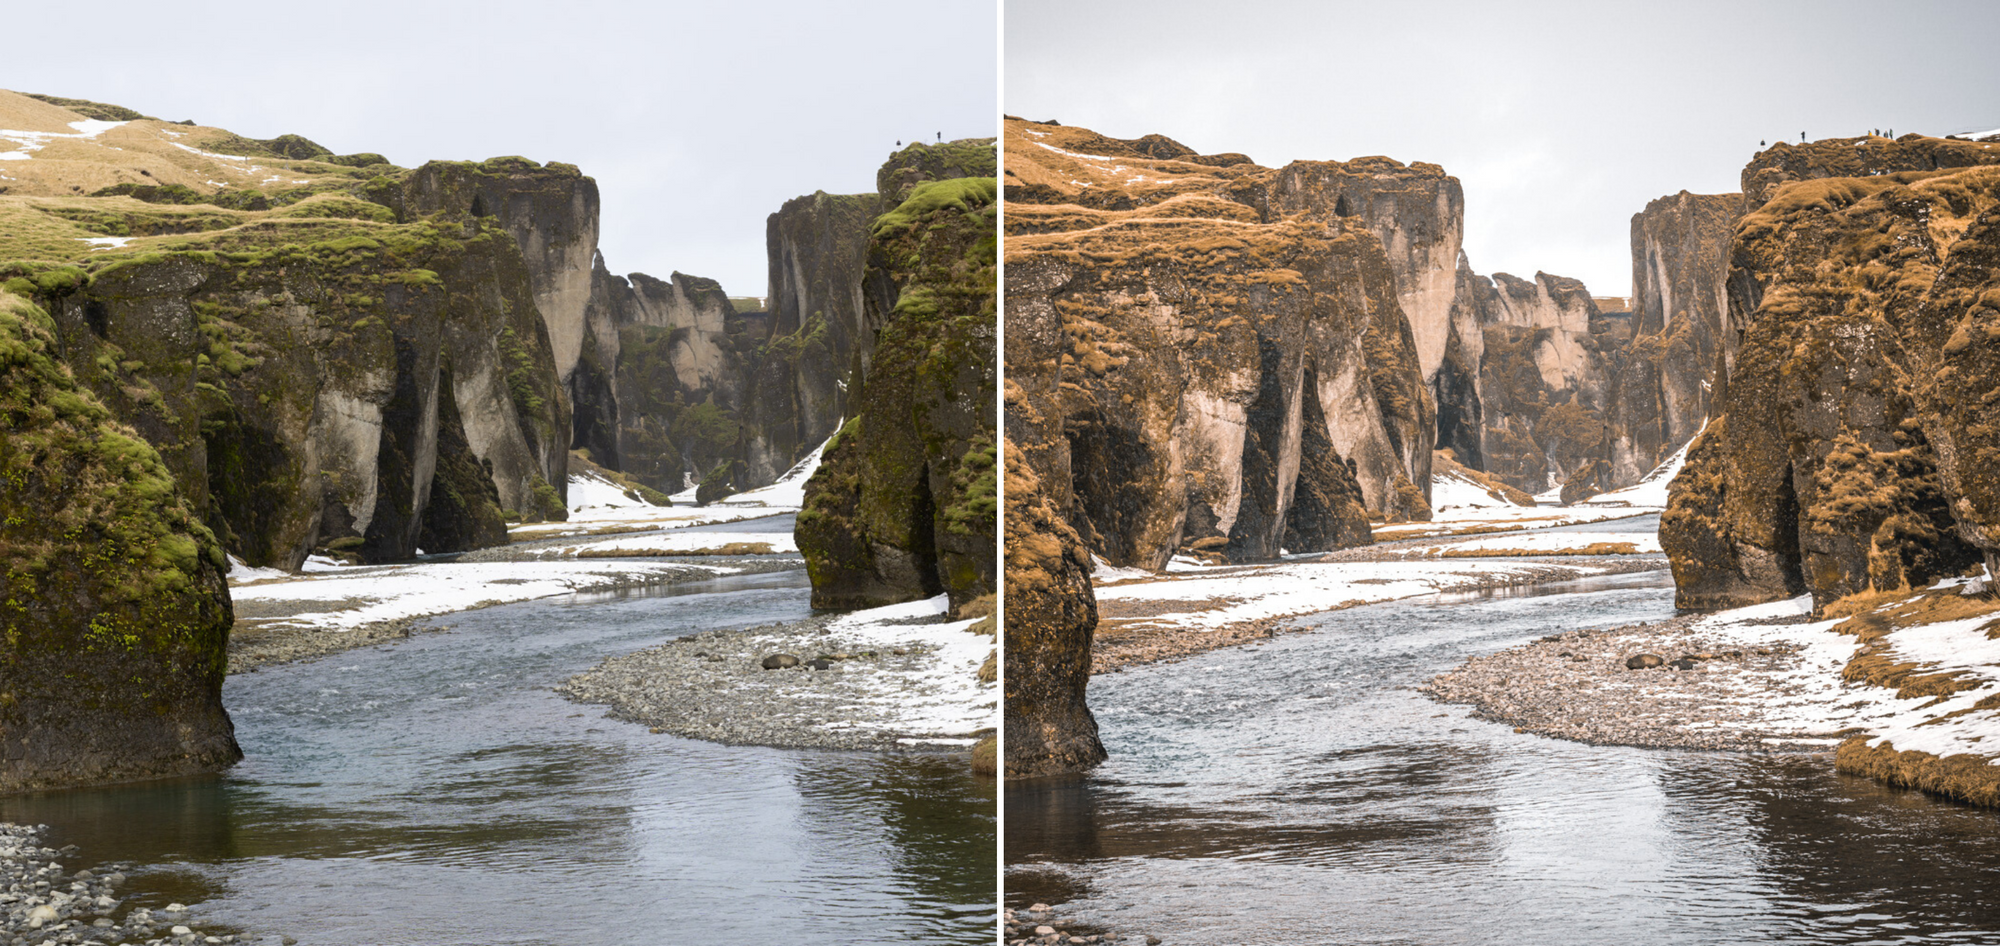 Winter Presets: Simon Markhof's Iceland Collection